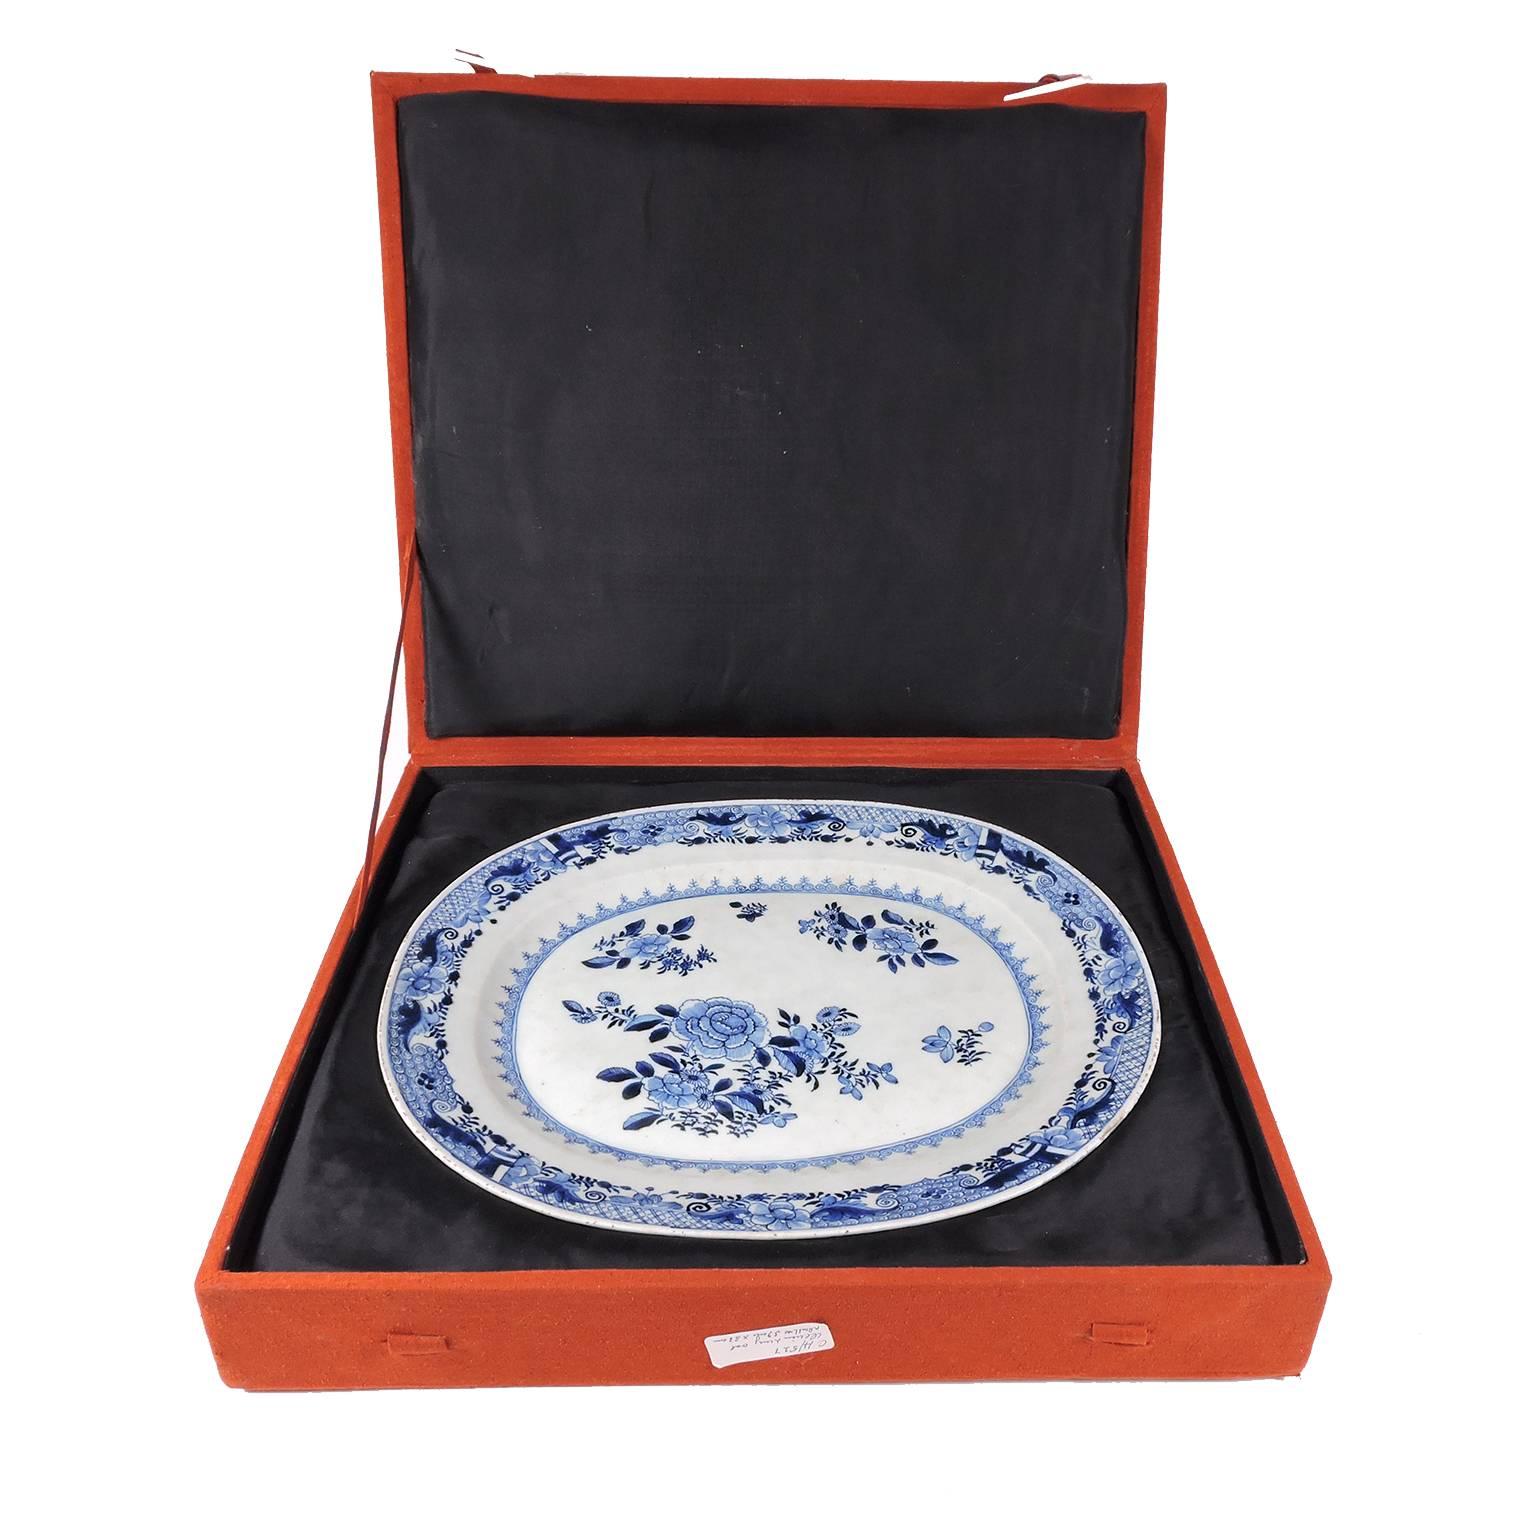 Chinese Qianlong blue and white porcelain platter, 18th century with floral decoration and fitted box. Exceptional quality. Platter: 15 1/4 x 13 inches; box: 17 3/4 15 1/2 x 3 inches.
Provenance: From an Important Collection of Asian Art. More